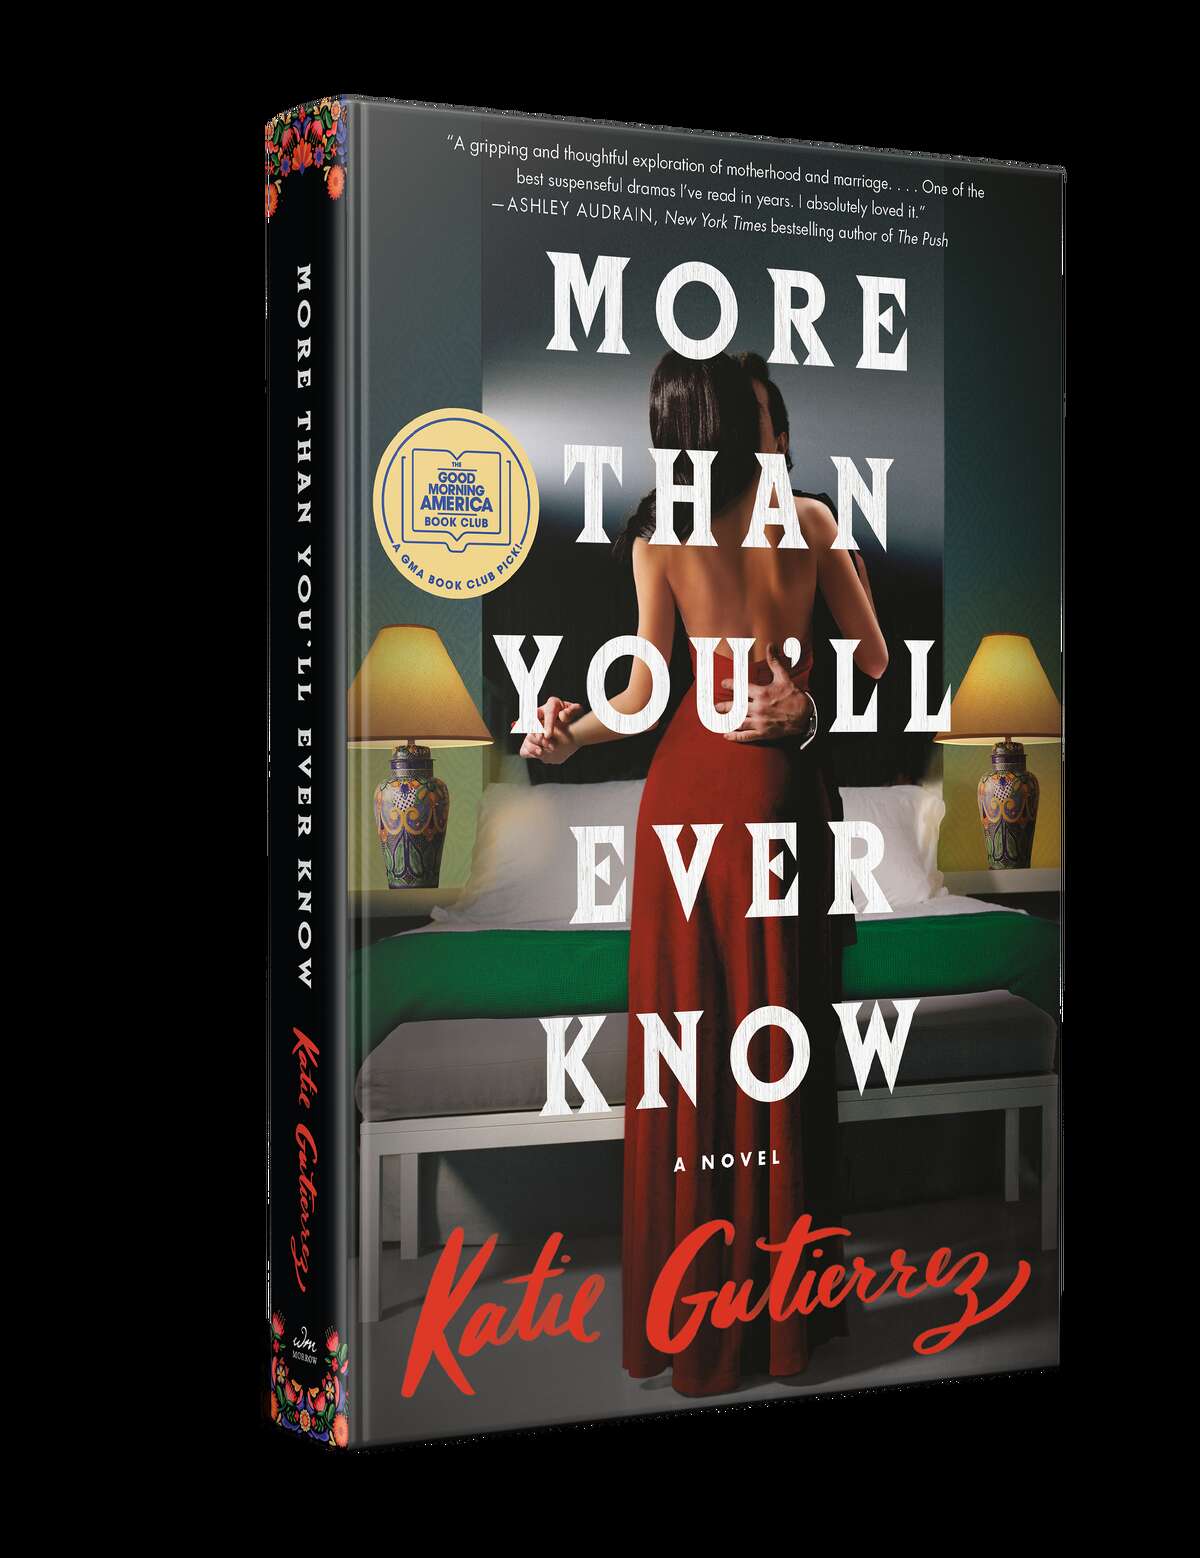 'More Than You'll Ever Know' by Katie Gutierrez, book cover.